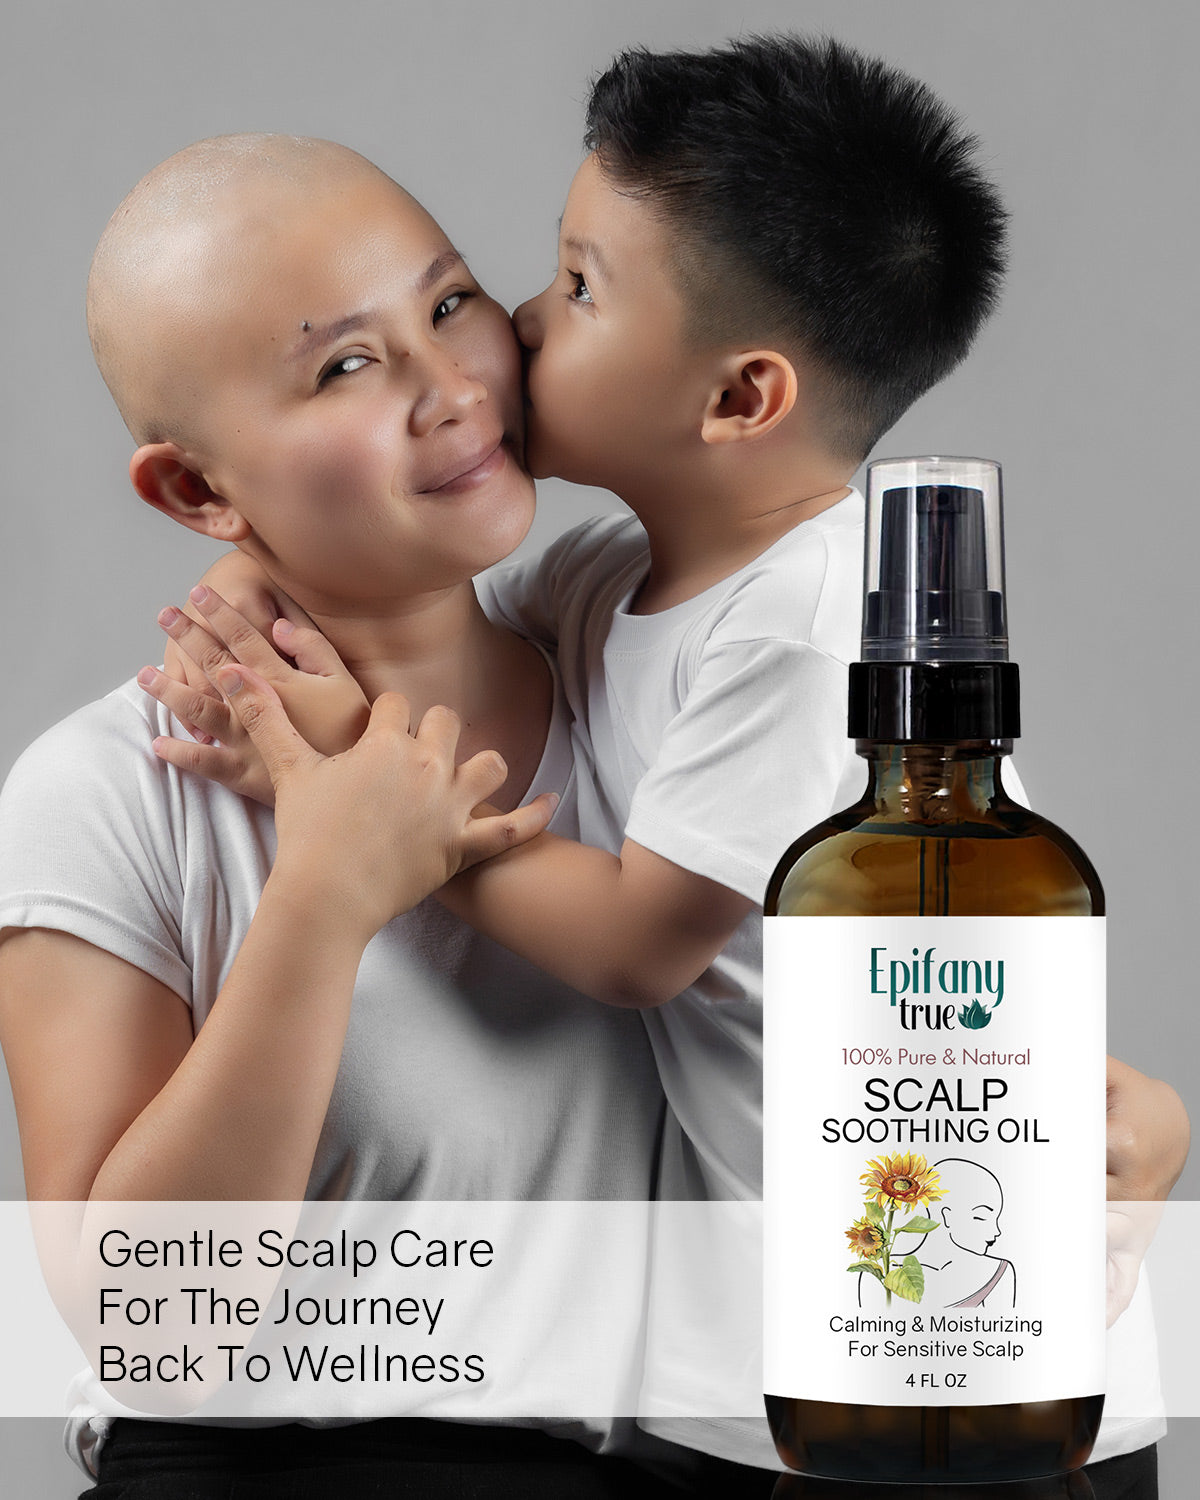 Epifany True 100% Pure & Natural Scalp Soothing Oil 4oz for tender dry itchy chemo scalp. Gentle care